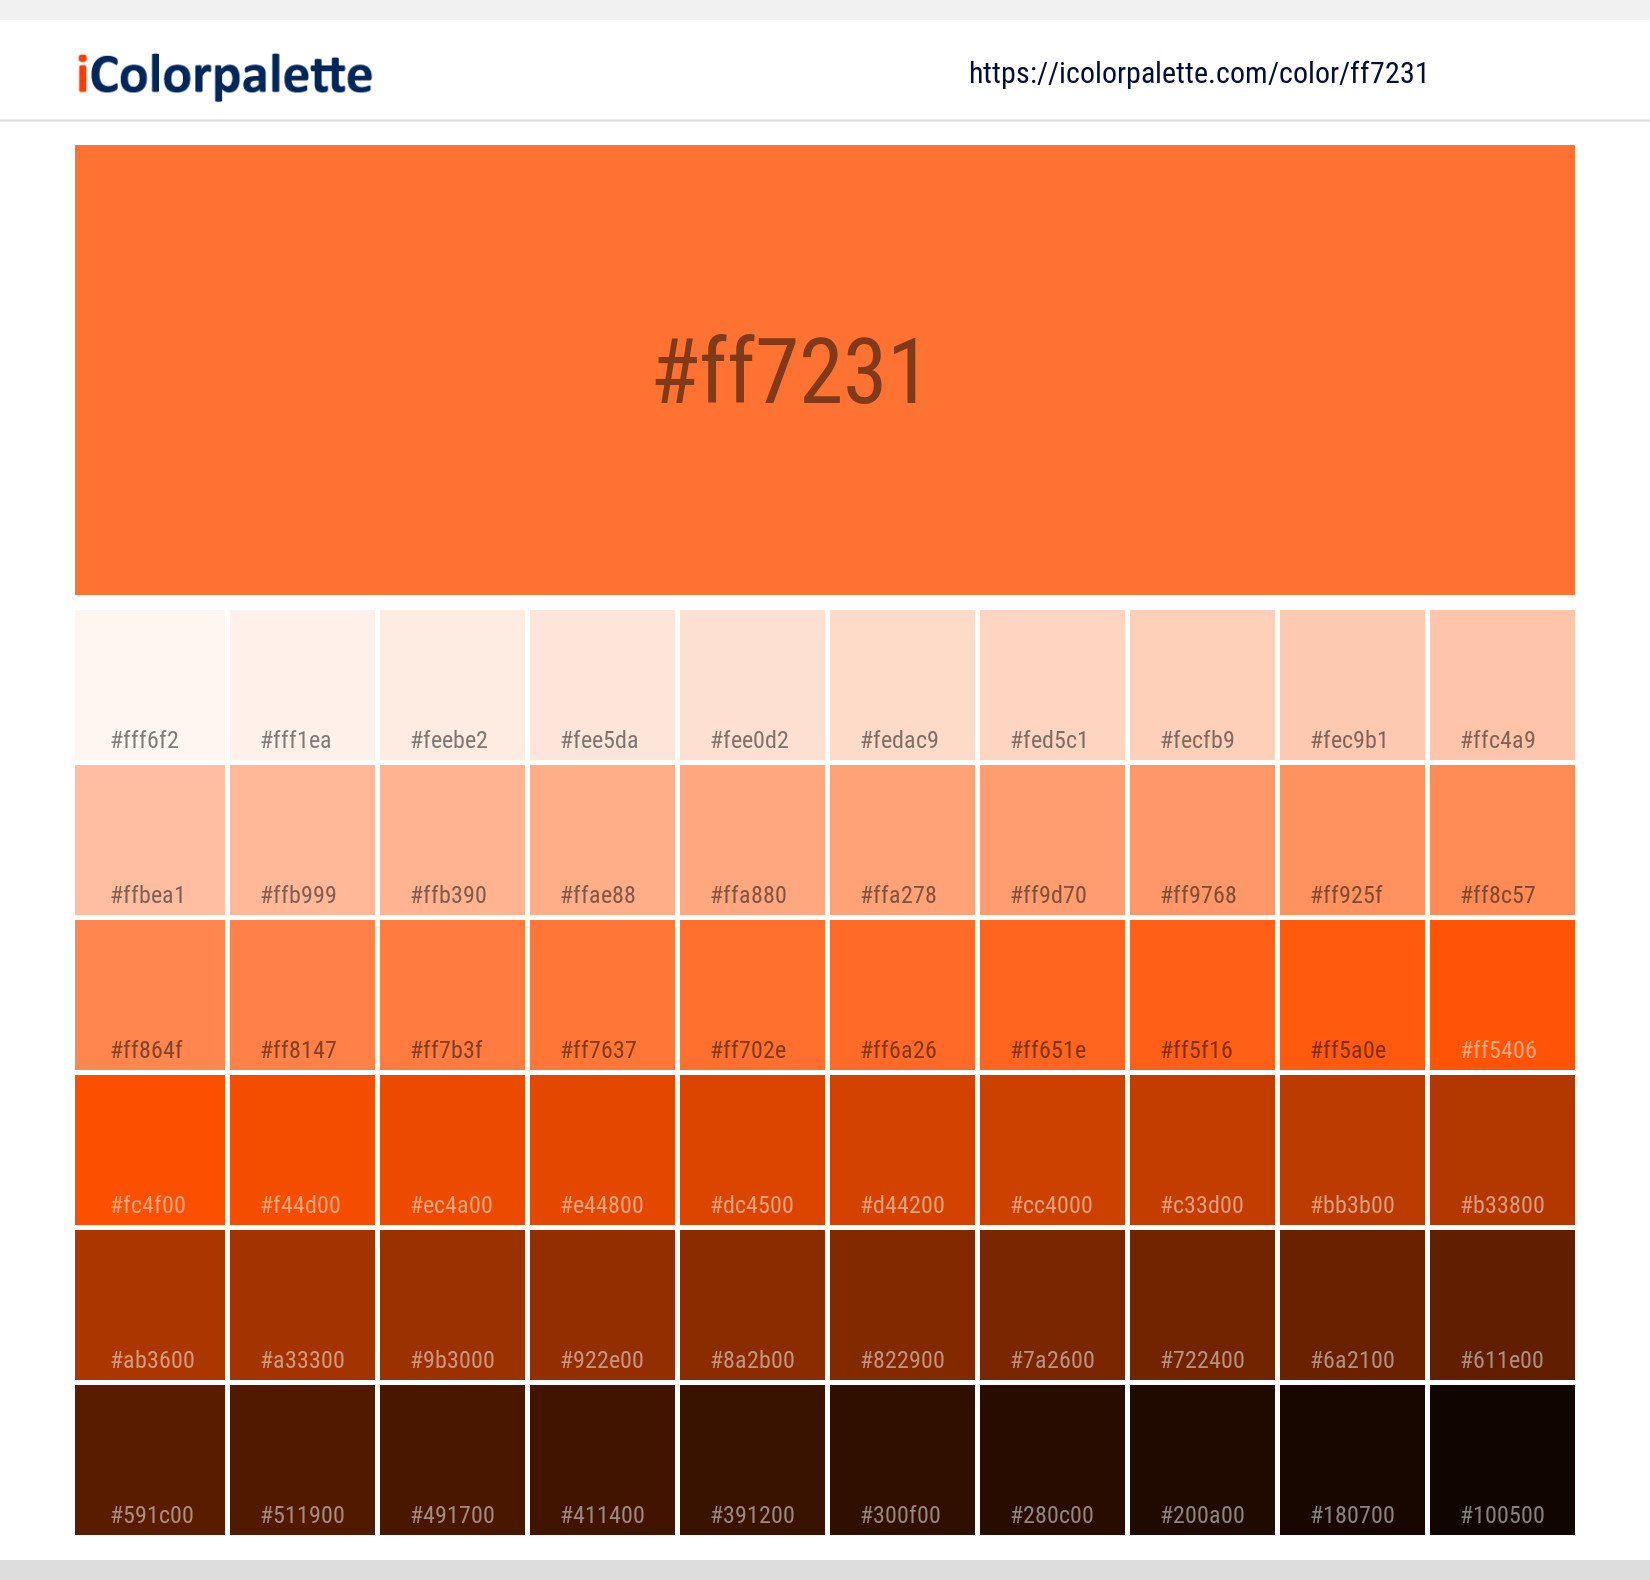 https://www.icolorpalette.com/download/shades/ff7231_color_shades.jpg